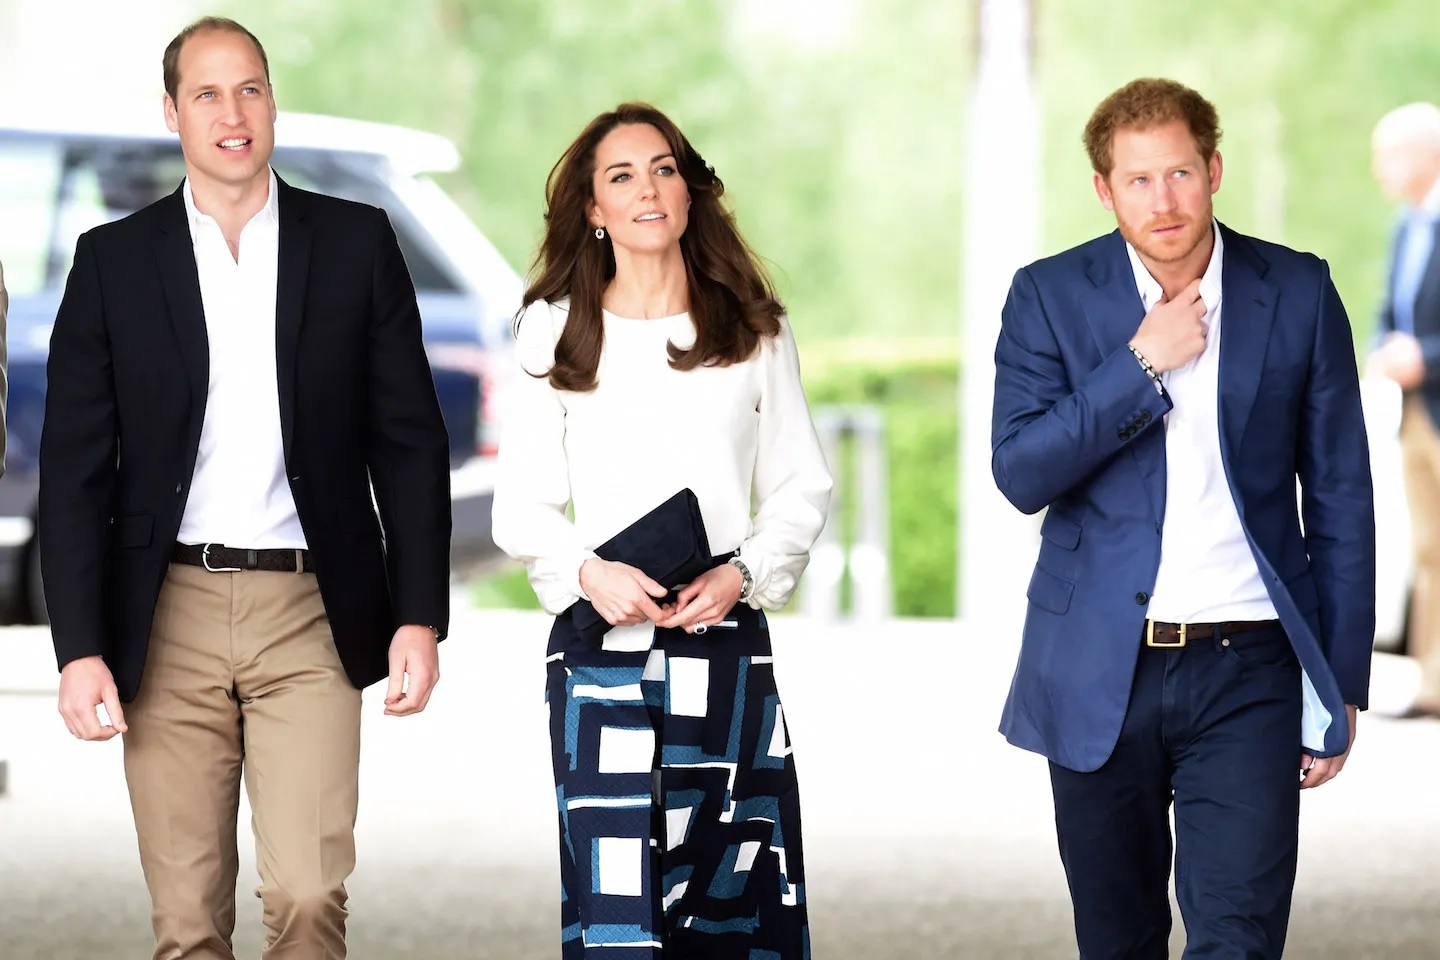 Prince Harry's well-rehearsed speech about Kate Middleton left her in tears, says insider